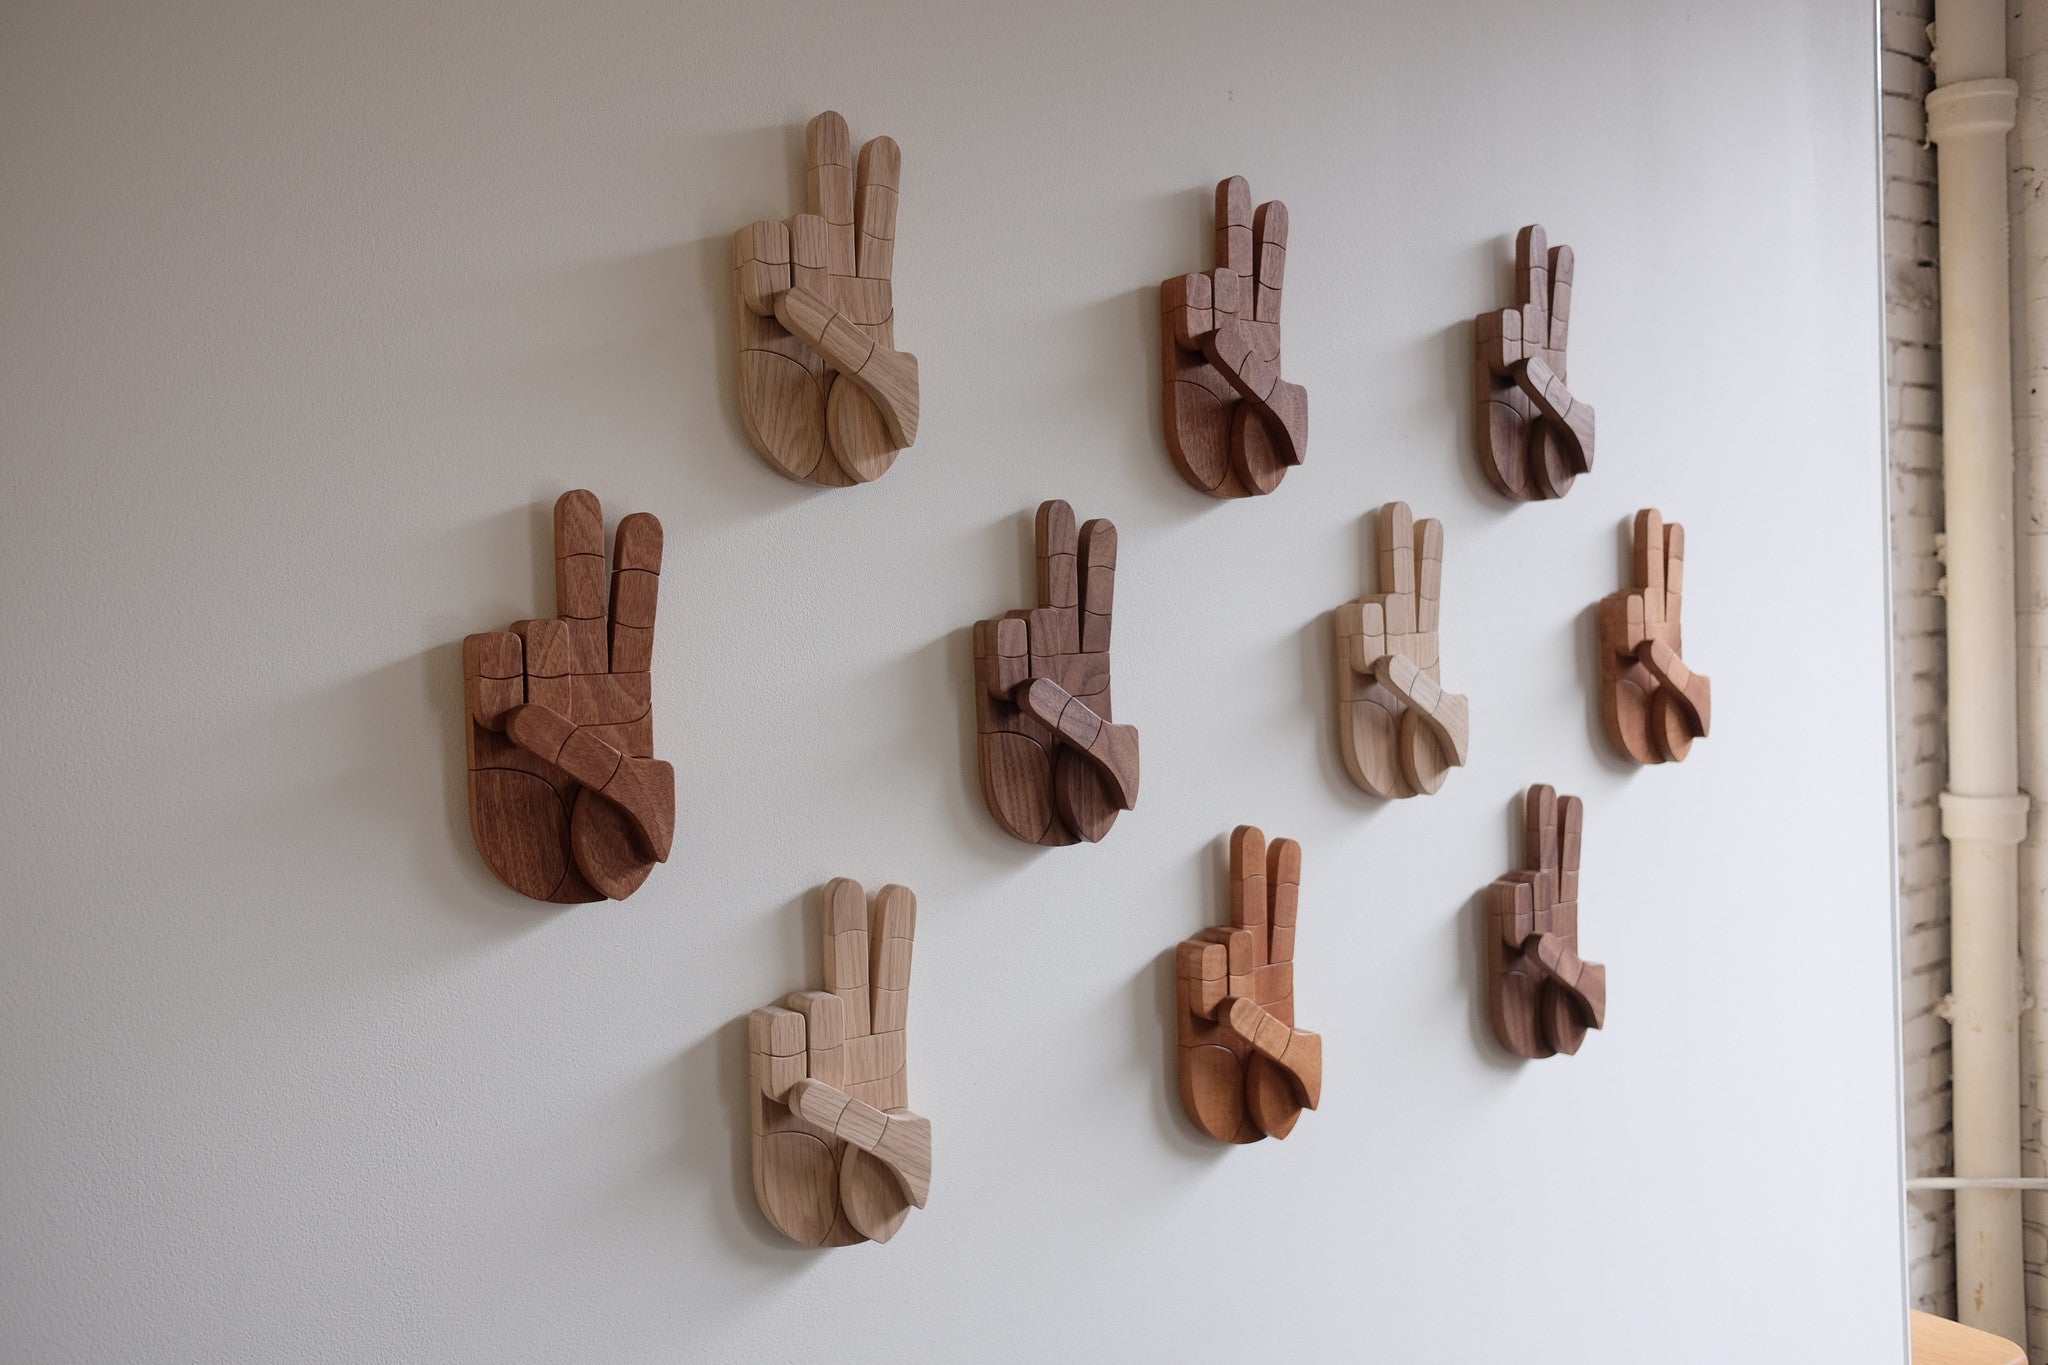 Wooden sculptures displayed on wall.